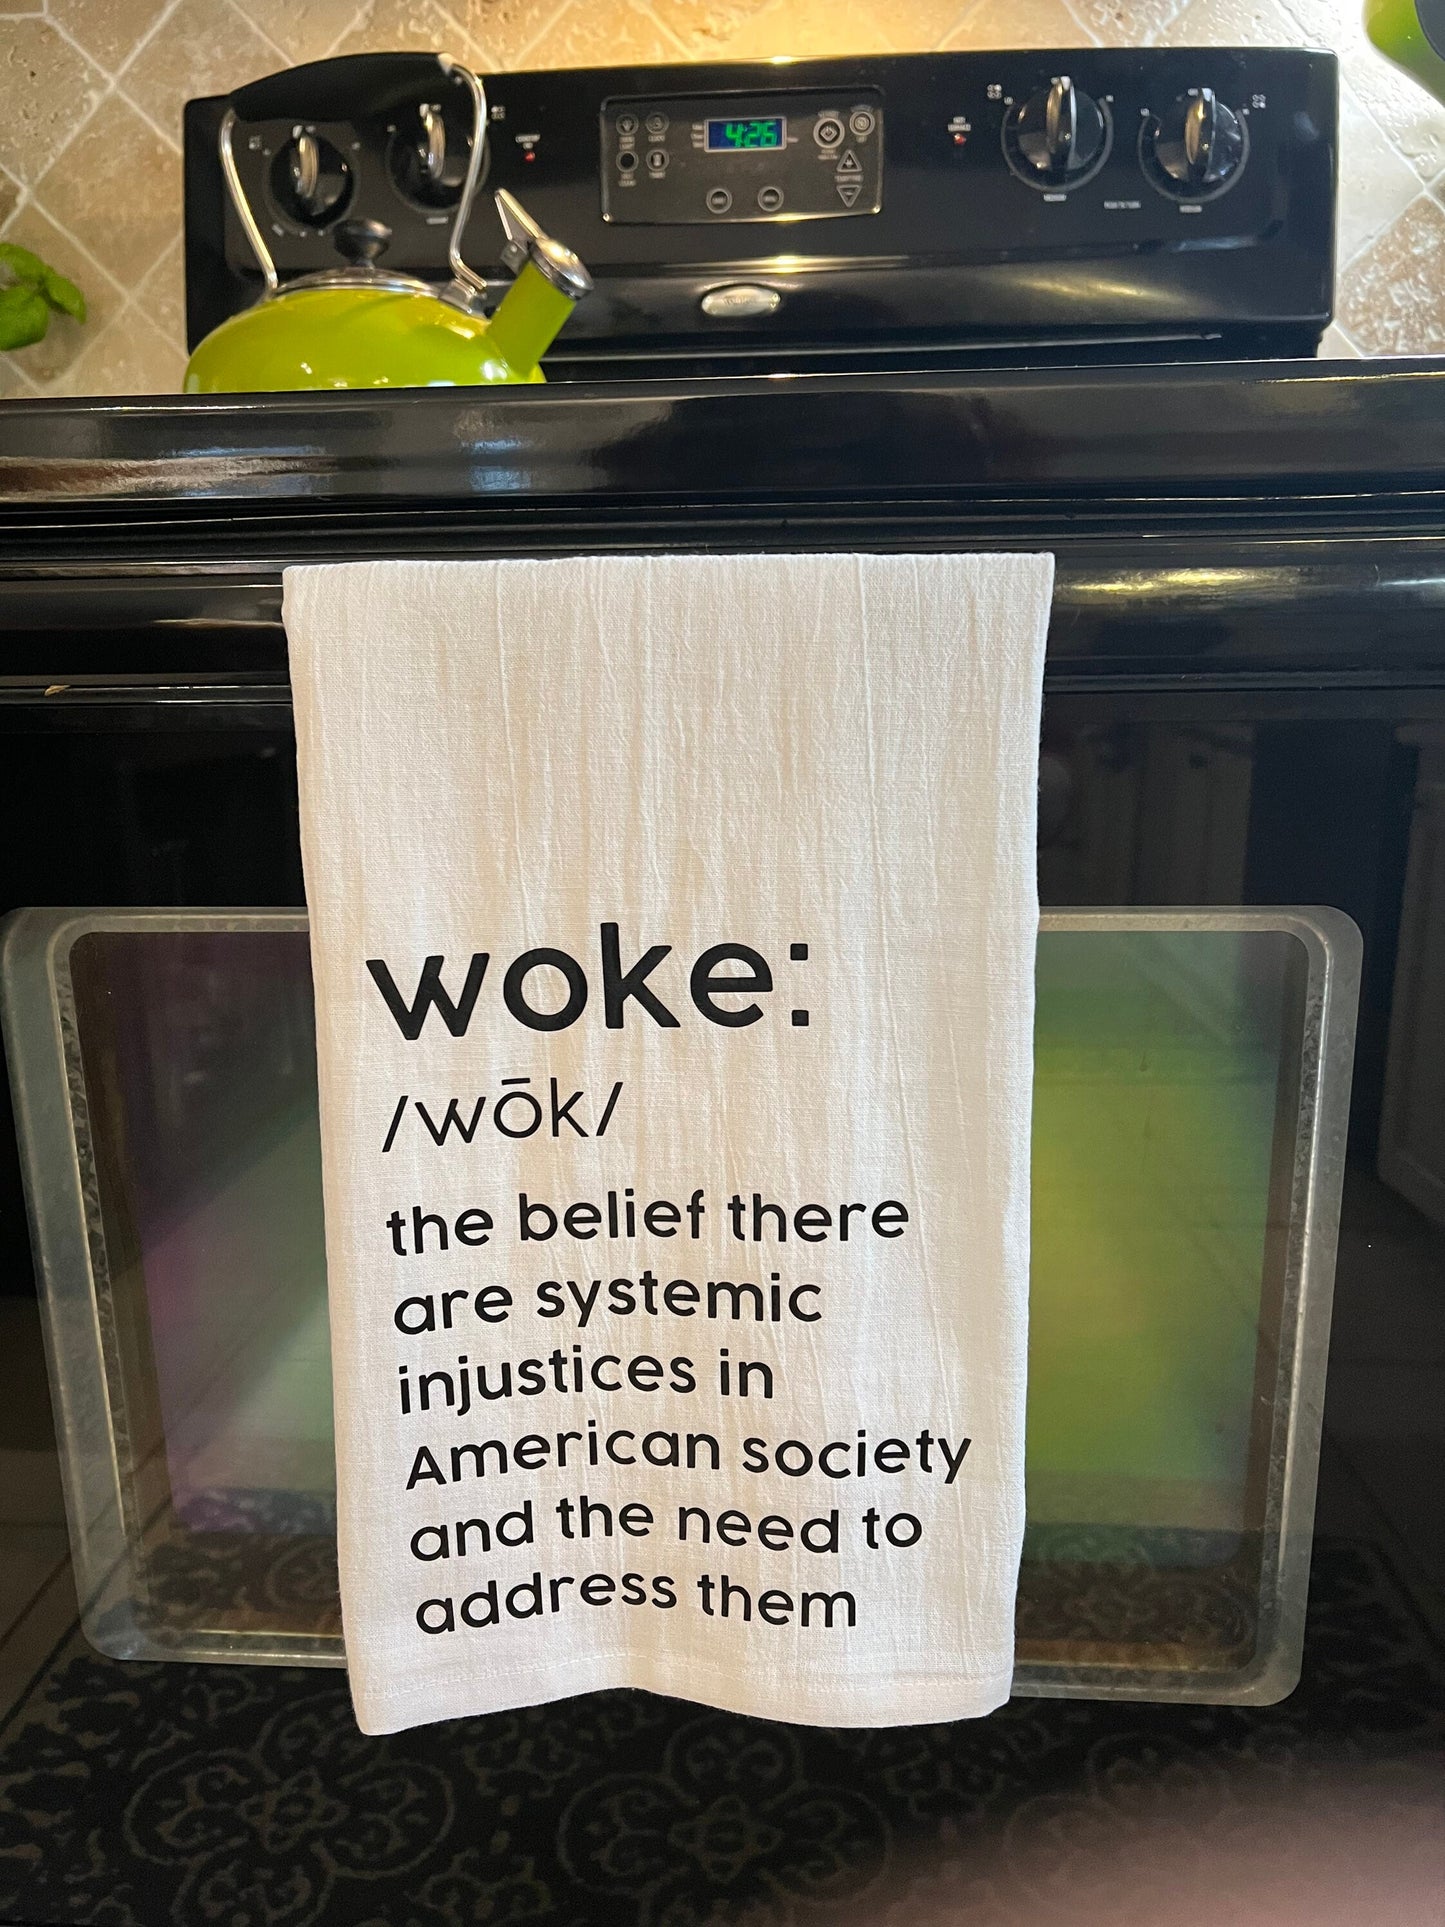 Woke Definition Tea Towel - Systemic Injustices and the Need to Address Them - Ron DeSantis